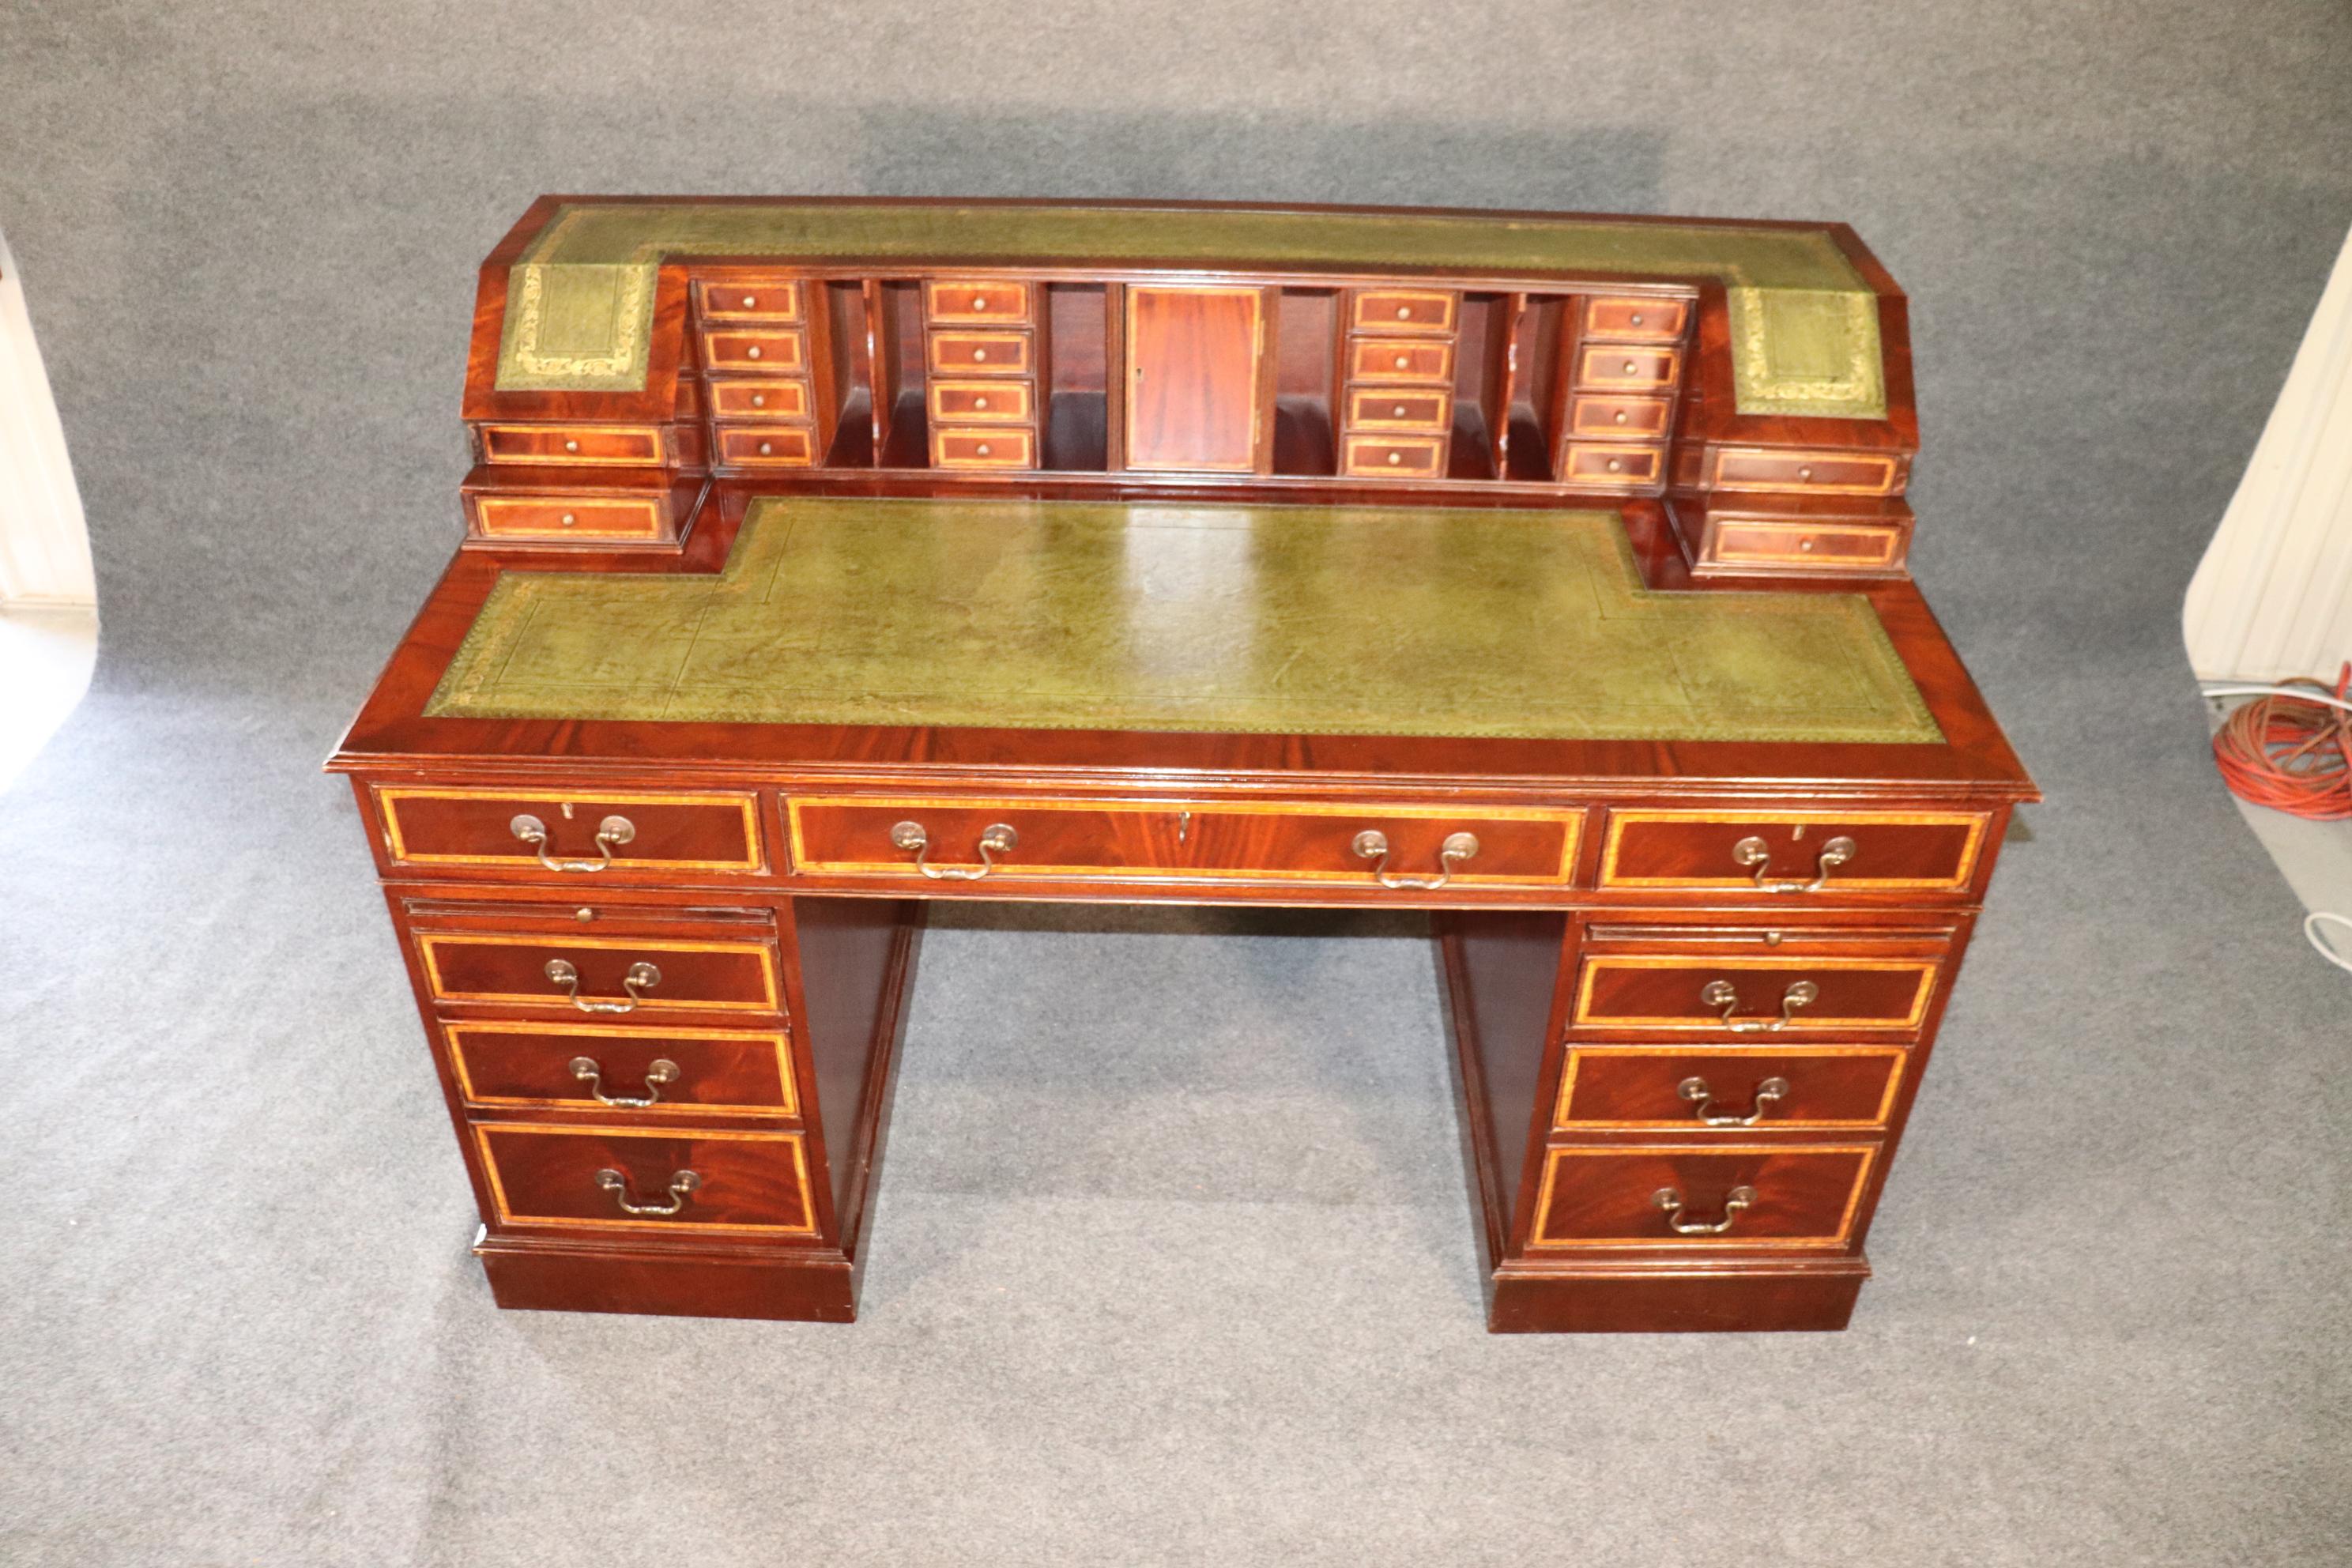 This is a beautiful English-made desk that comes apart into four pieces and has beautiful leather with gold tooled embossing on the top's surface. There are numerous drawers and storage areas on the superstructure. The desk dates to the 1950s era